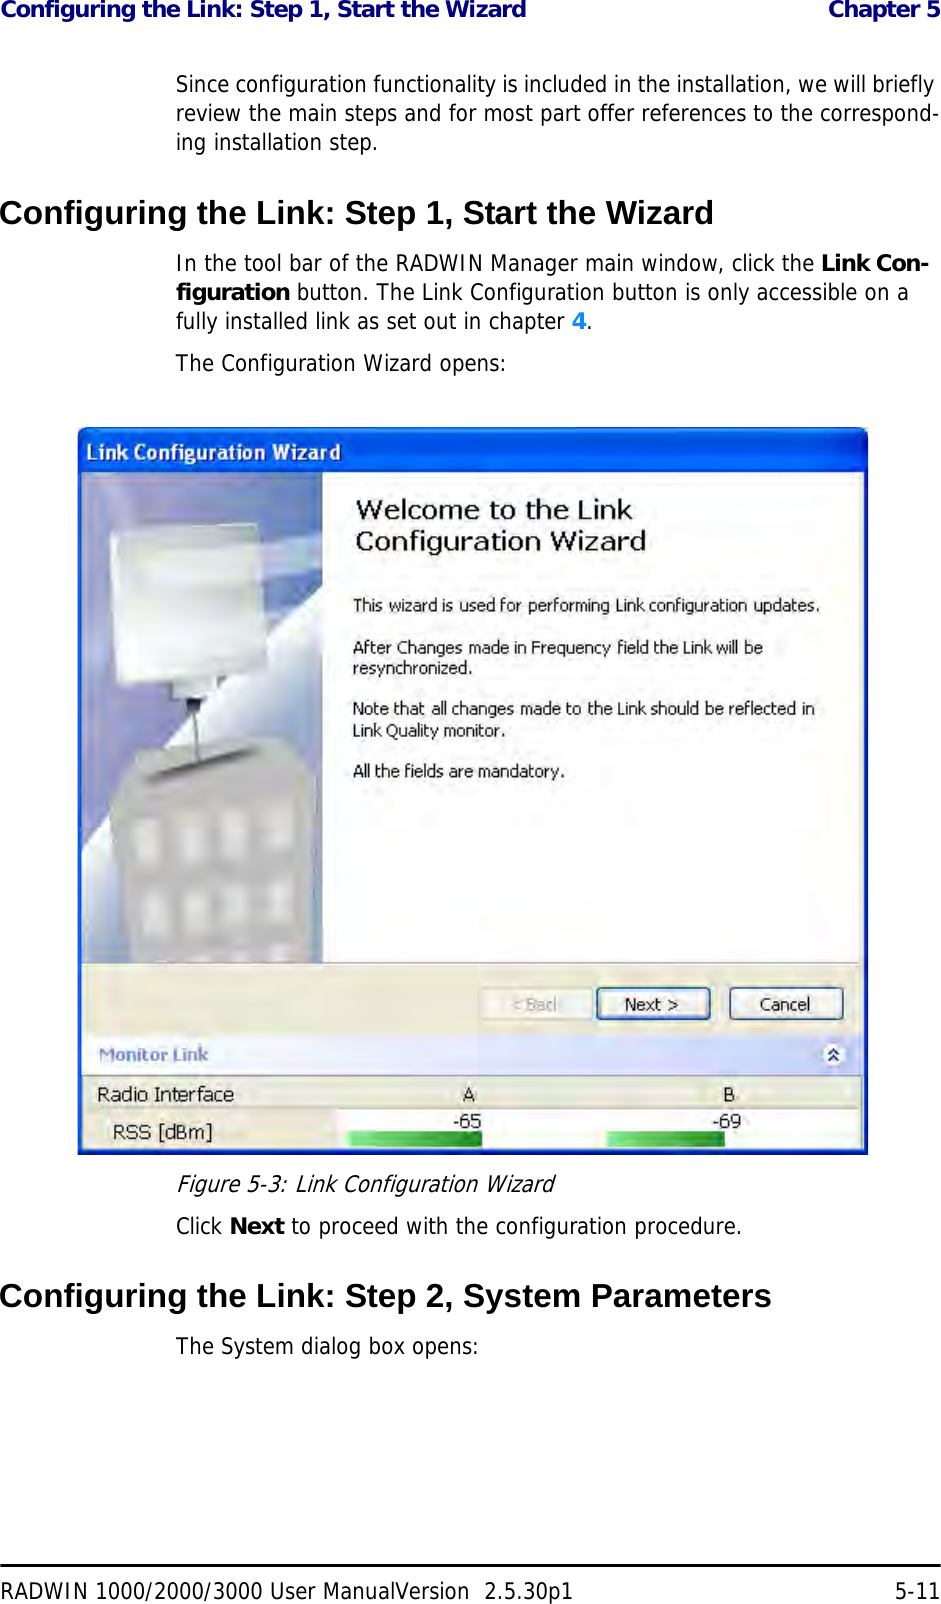 Configuring the Link: Step 1, Start the Wizard  Chapter 5RADWIN 1000/2000/3000 User ManualVersion  2.5.30p1 5-11Since configuration functionality is included in the installation, we will briefly review the main steps and for most part offer references to the correspond-ing installation step.Configuring the Link: Step 1, Start the WizardIn the tool bar of the RADWIN Manager main window, click the Link Con-figuration button. The Link Configuration button is only accessible on a fully installed link as set out in chapter 4.The Configuration Wizard opens:Figure 5-3: Link Configuration WizardClick Next to proceed with the configuration procedure.Configuring the Link: Step 2, System ParametersThe System dialog box opens: